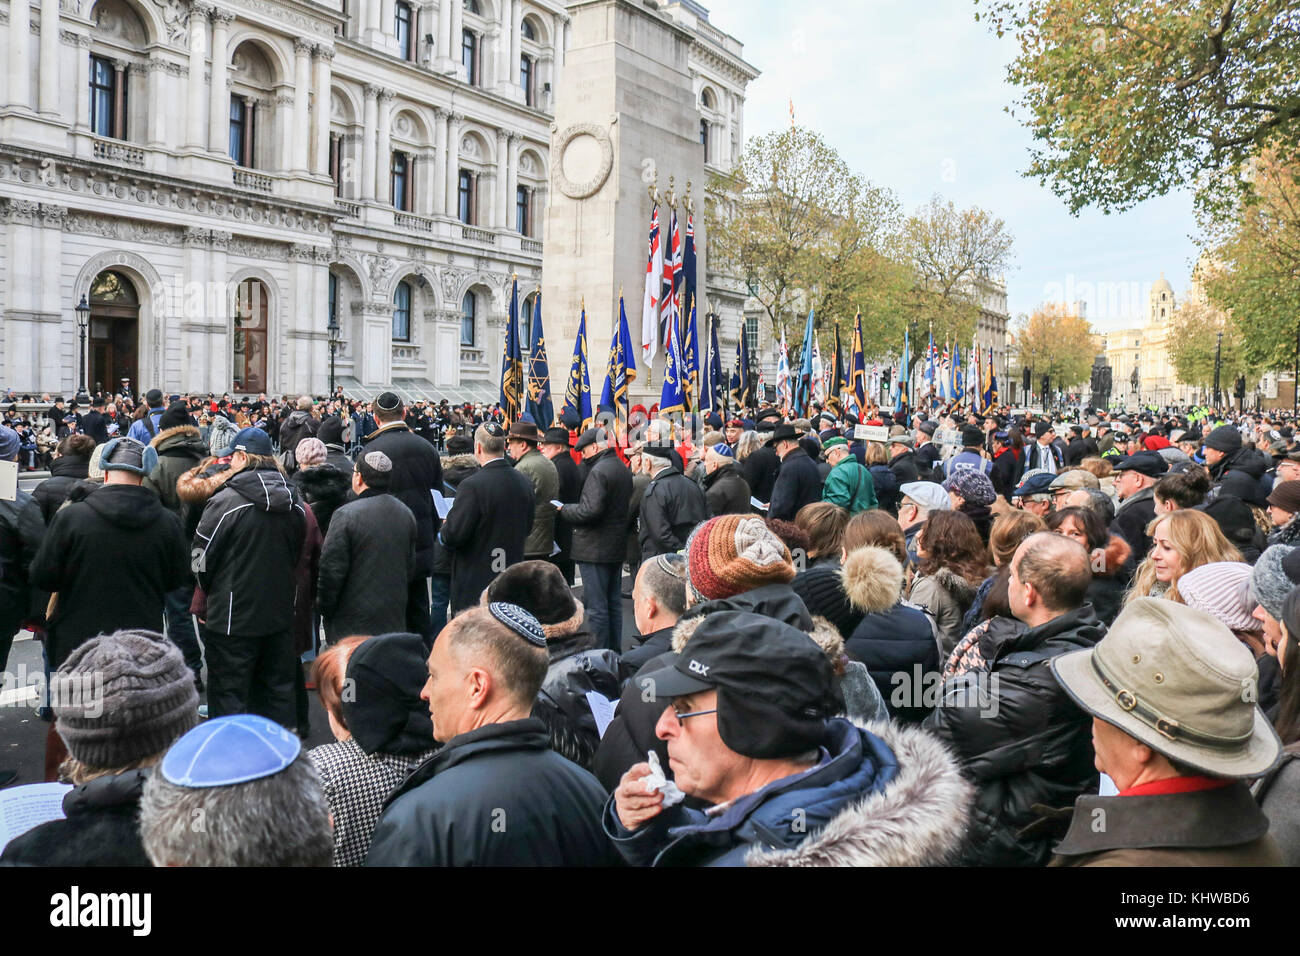 London UK. 19th November 2017. Annual ceremony  for Jewish Ex Servicemen and Women Whitehall was held at the Cenotaph in Whitehall to commemorate the sacrifices made in two world wars Credit: amer ghazzal/Alamy Live News Credit: amer ghazzal/Alamy Live News Stock Photo